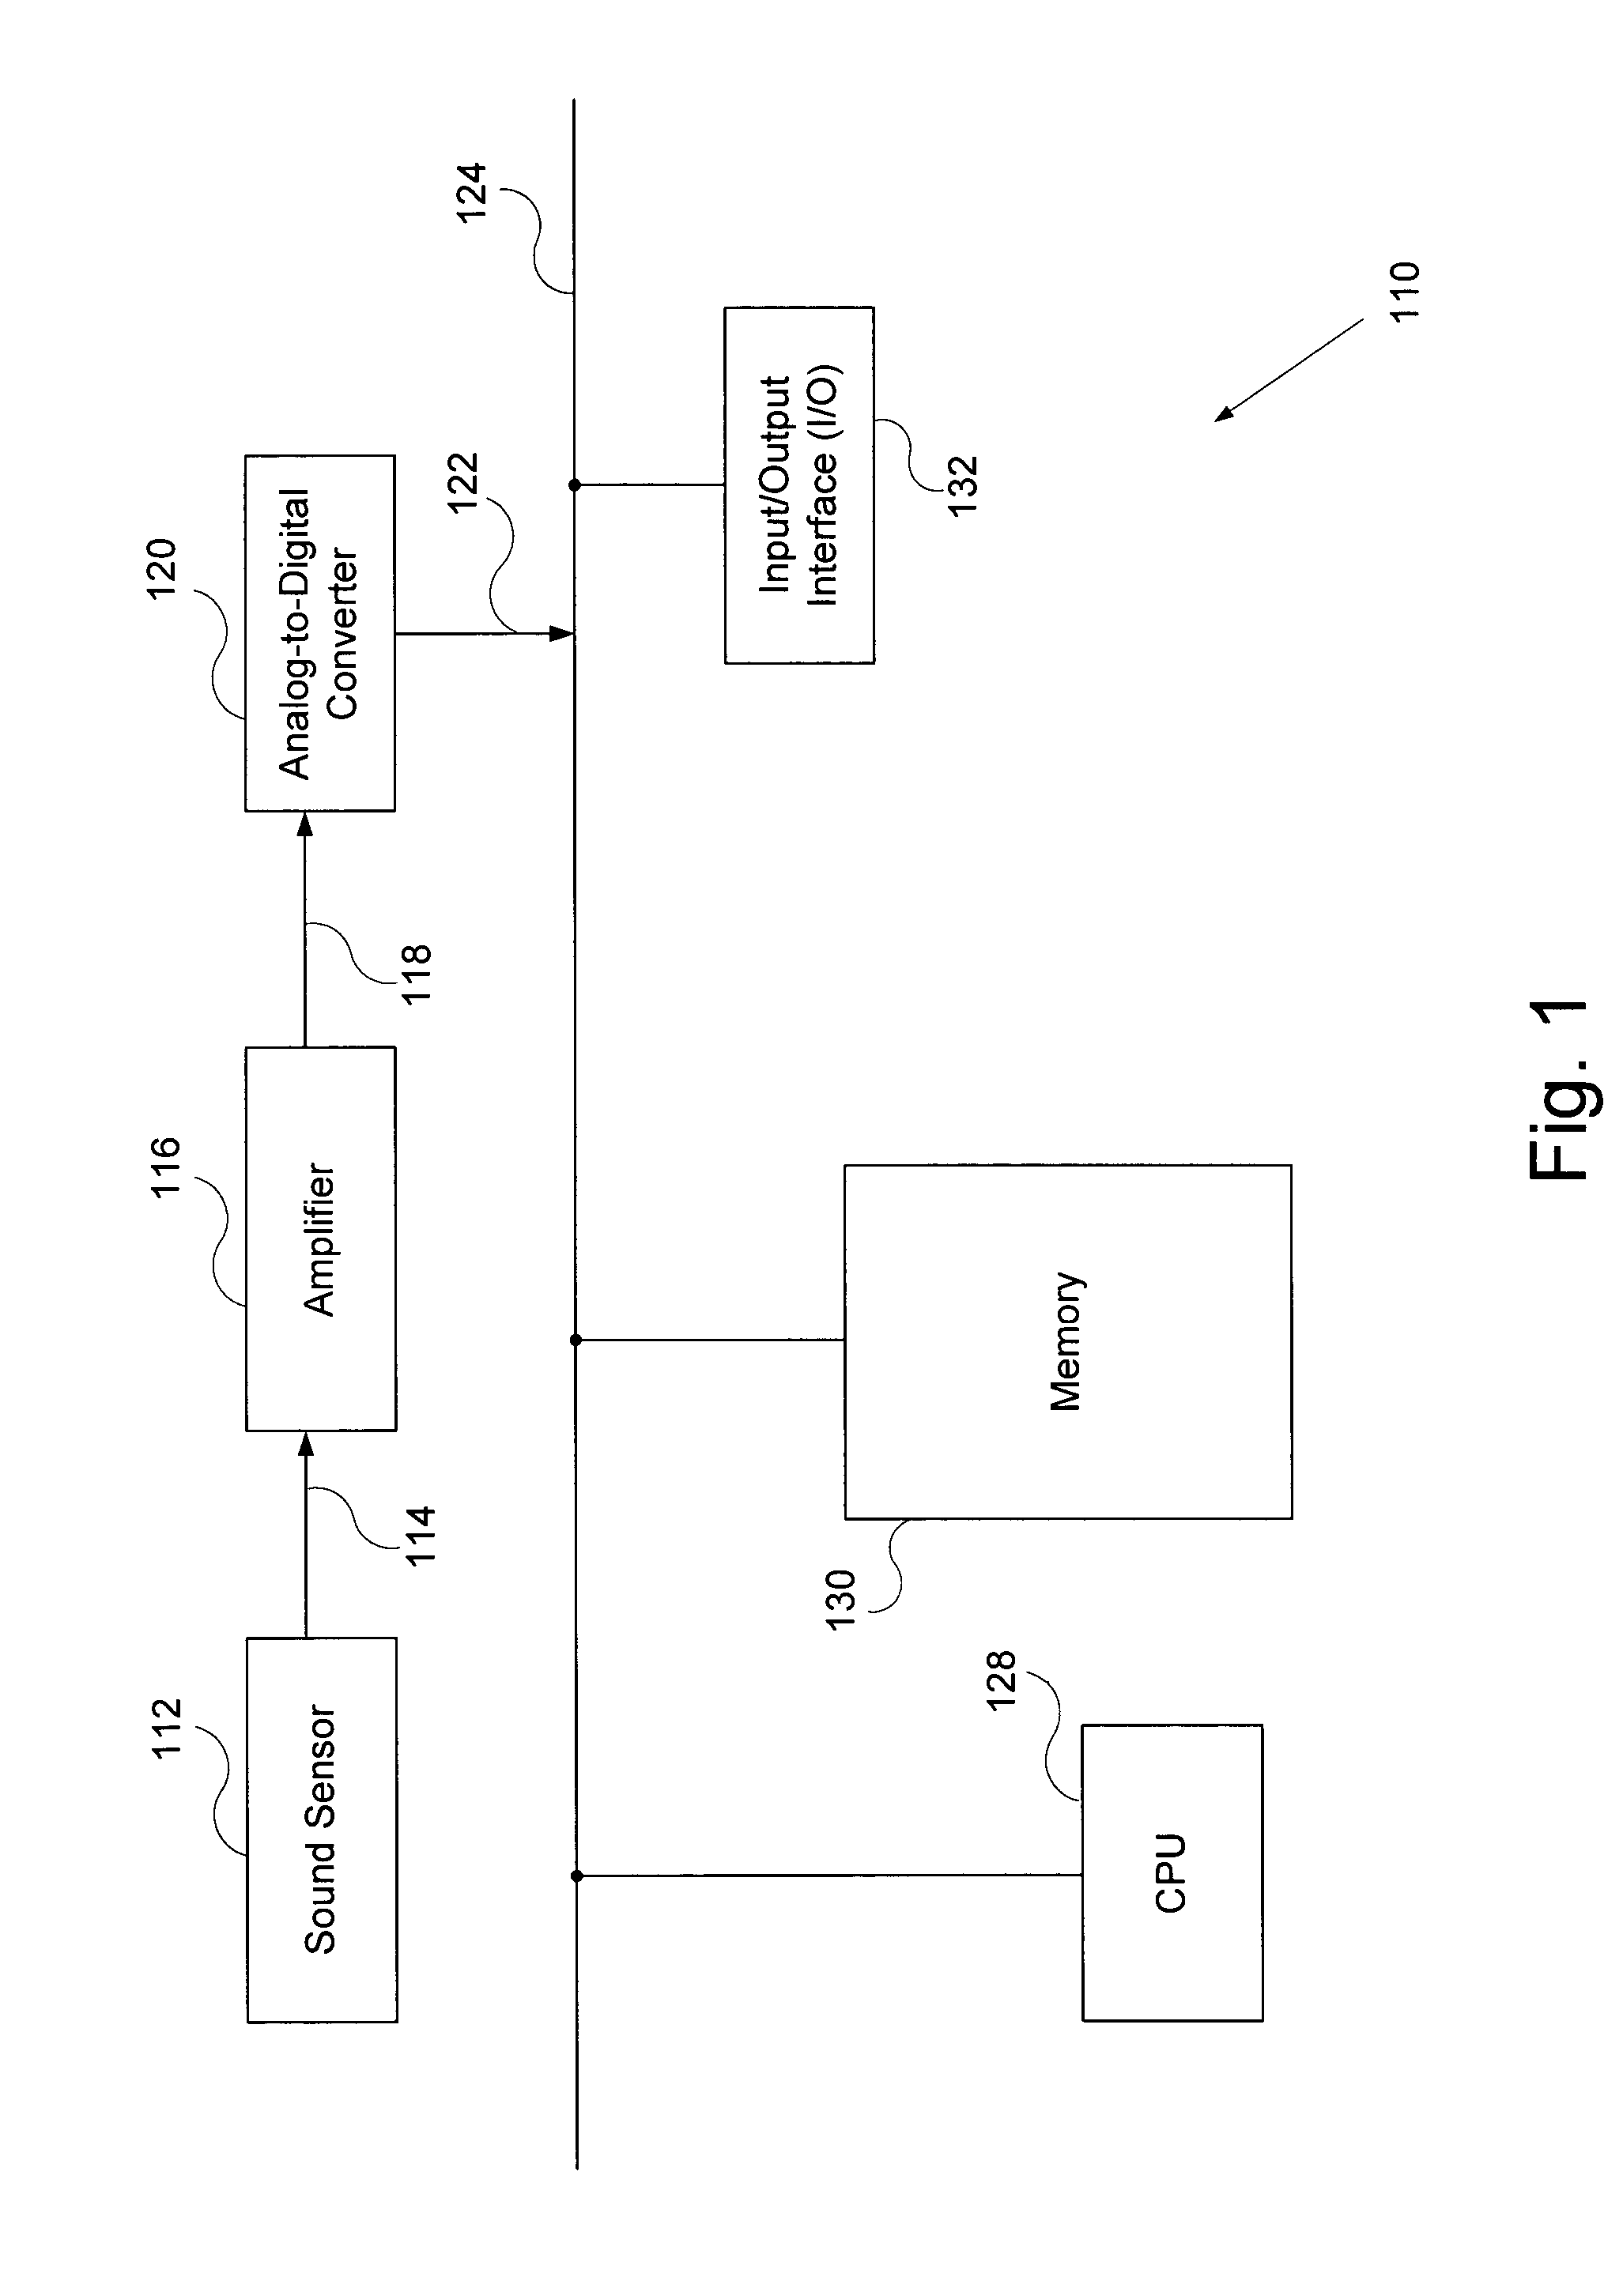 System and method for performing speech recognition by utilizing a multi-language dictionary